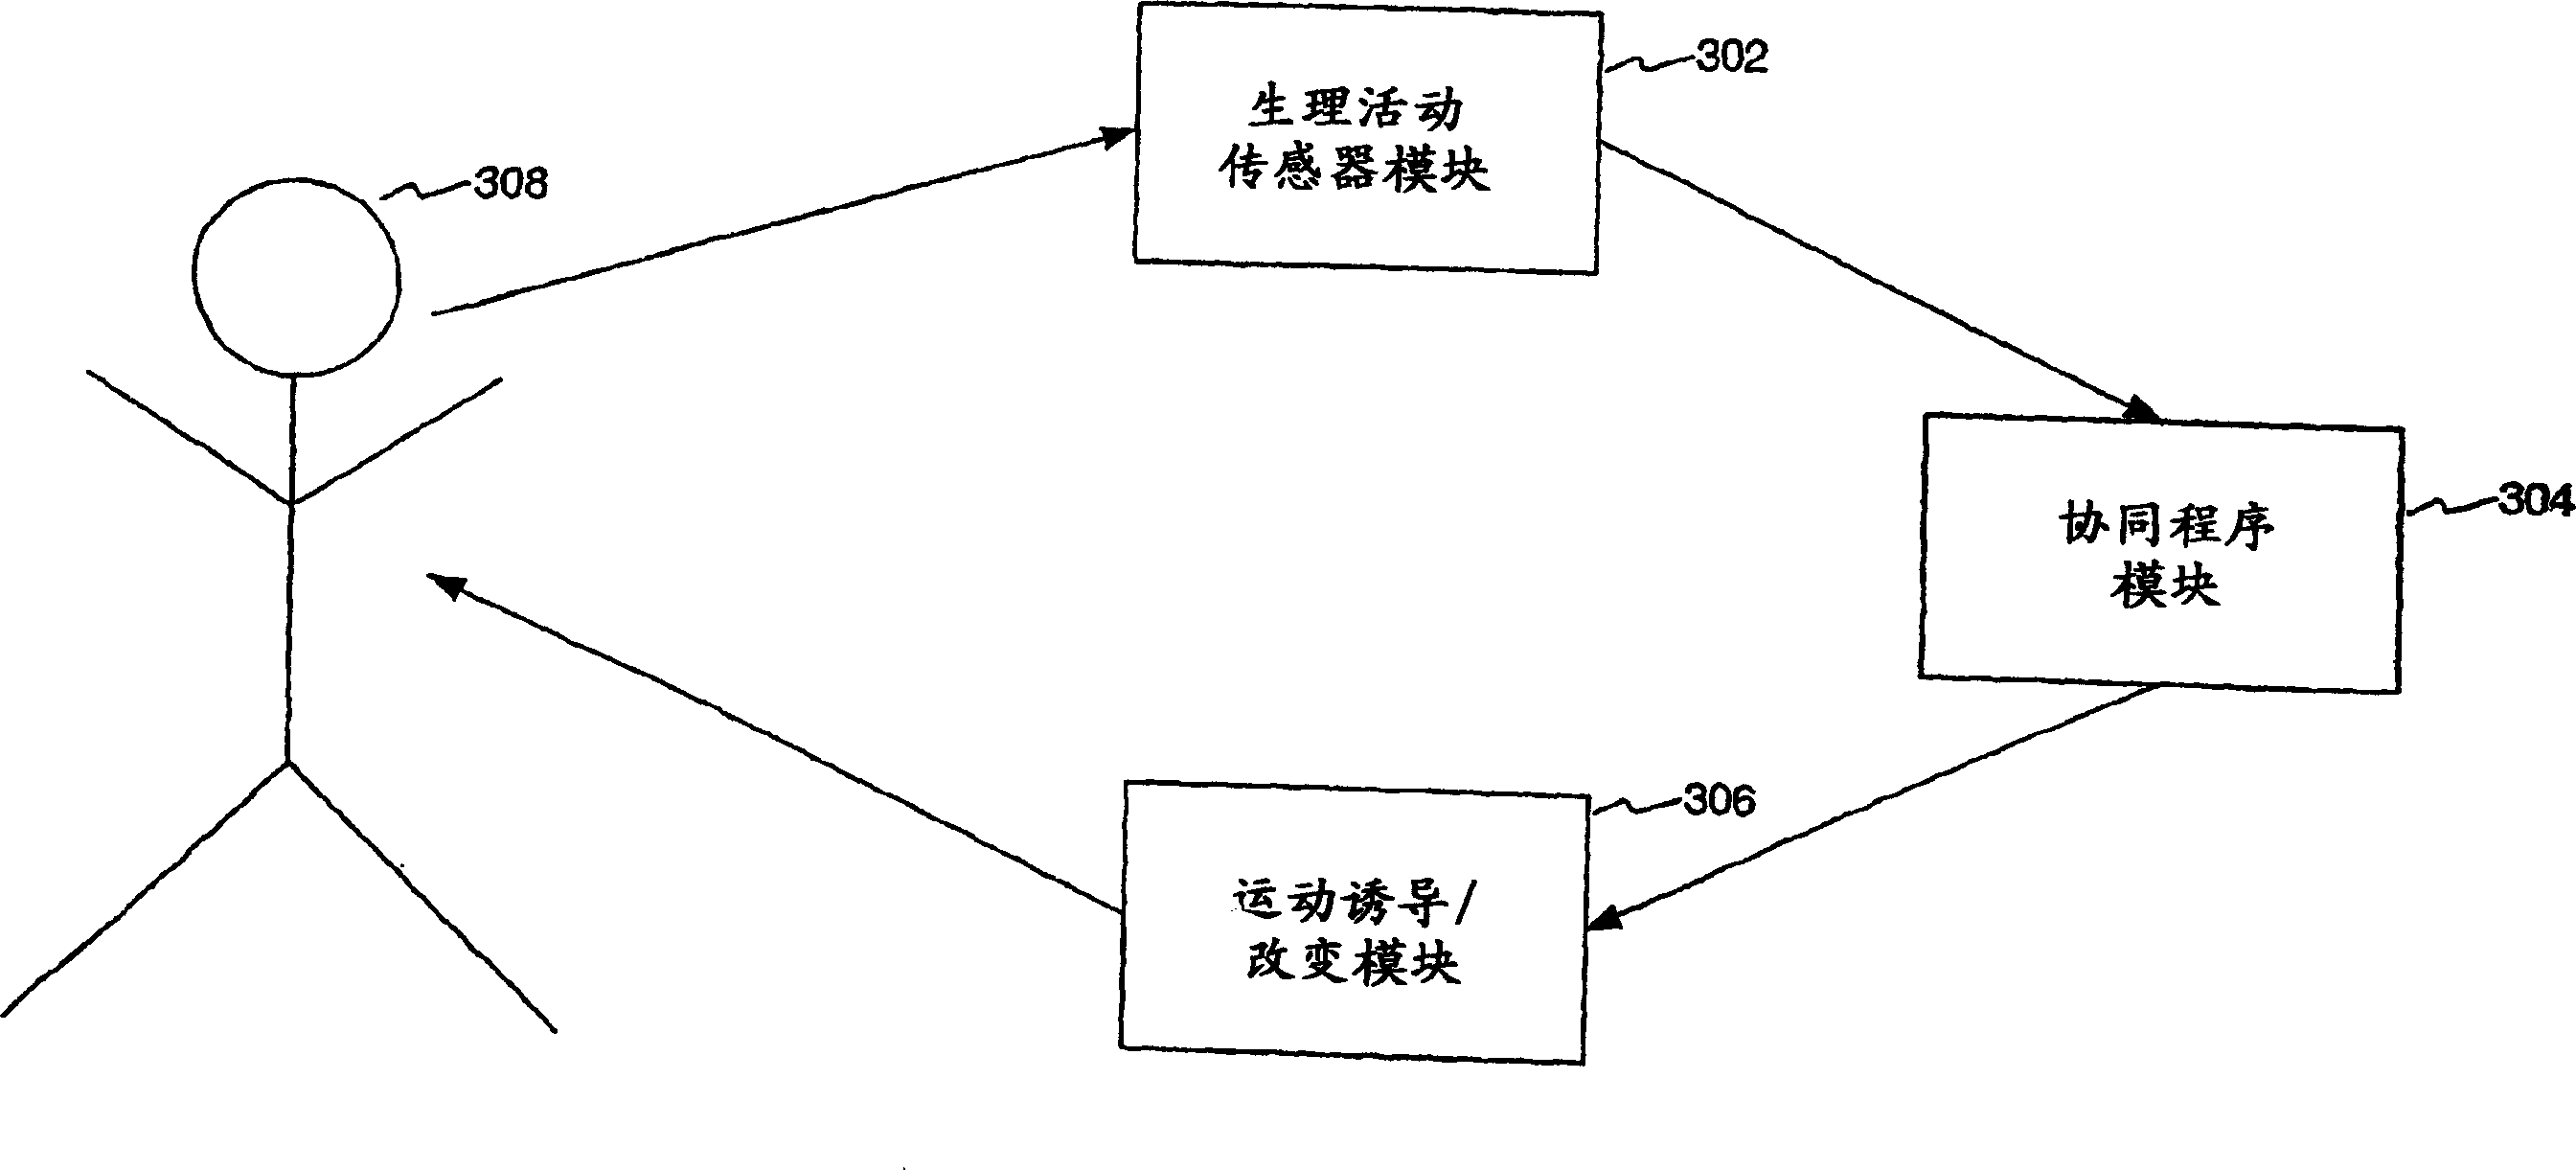 Apparatus, method and computer program product to produce or direct movements in synergic timed correlation with physiological activity